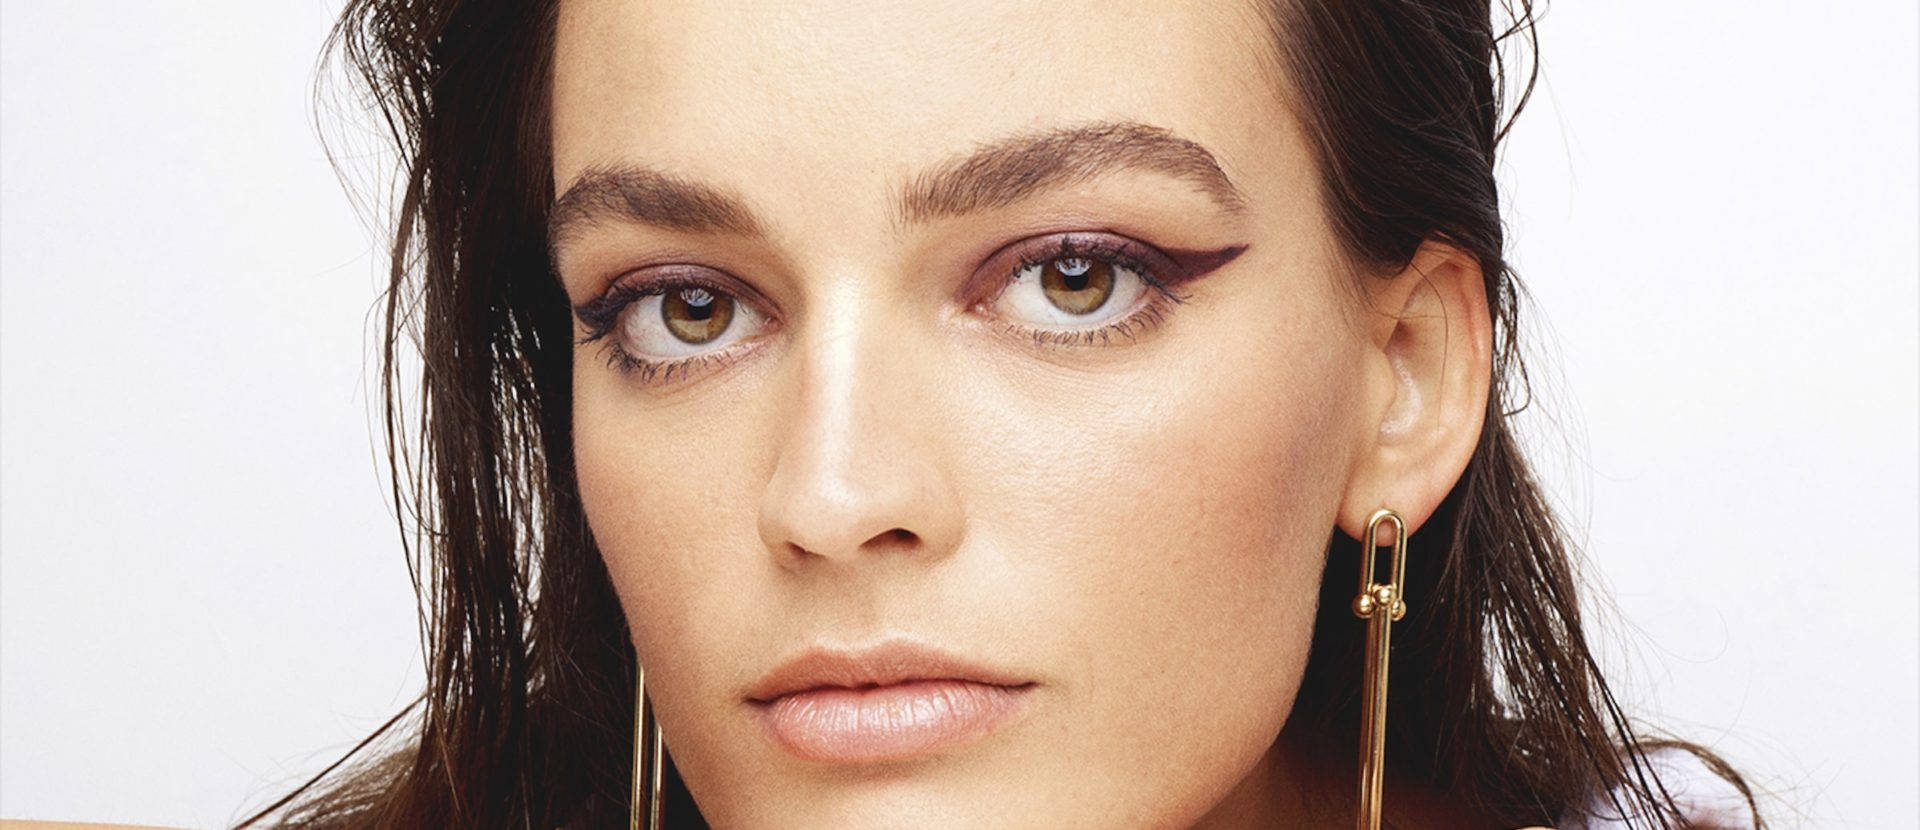 Emma Mackey Showcases Radiant Beauty With A Stunning Winged Liner Look